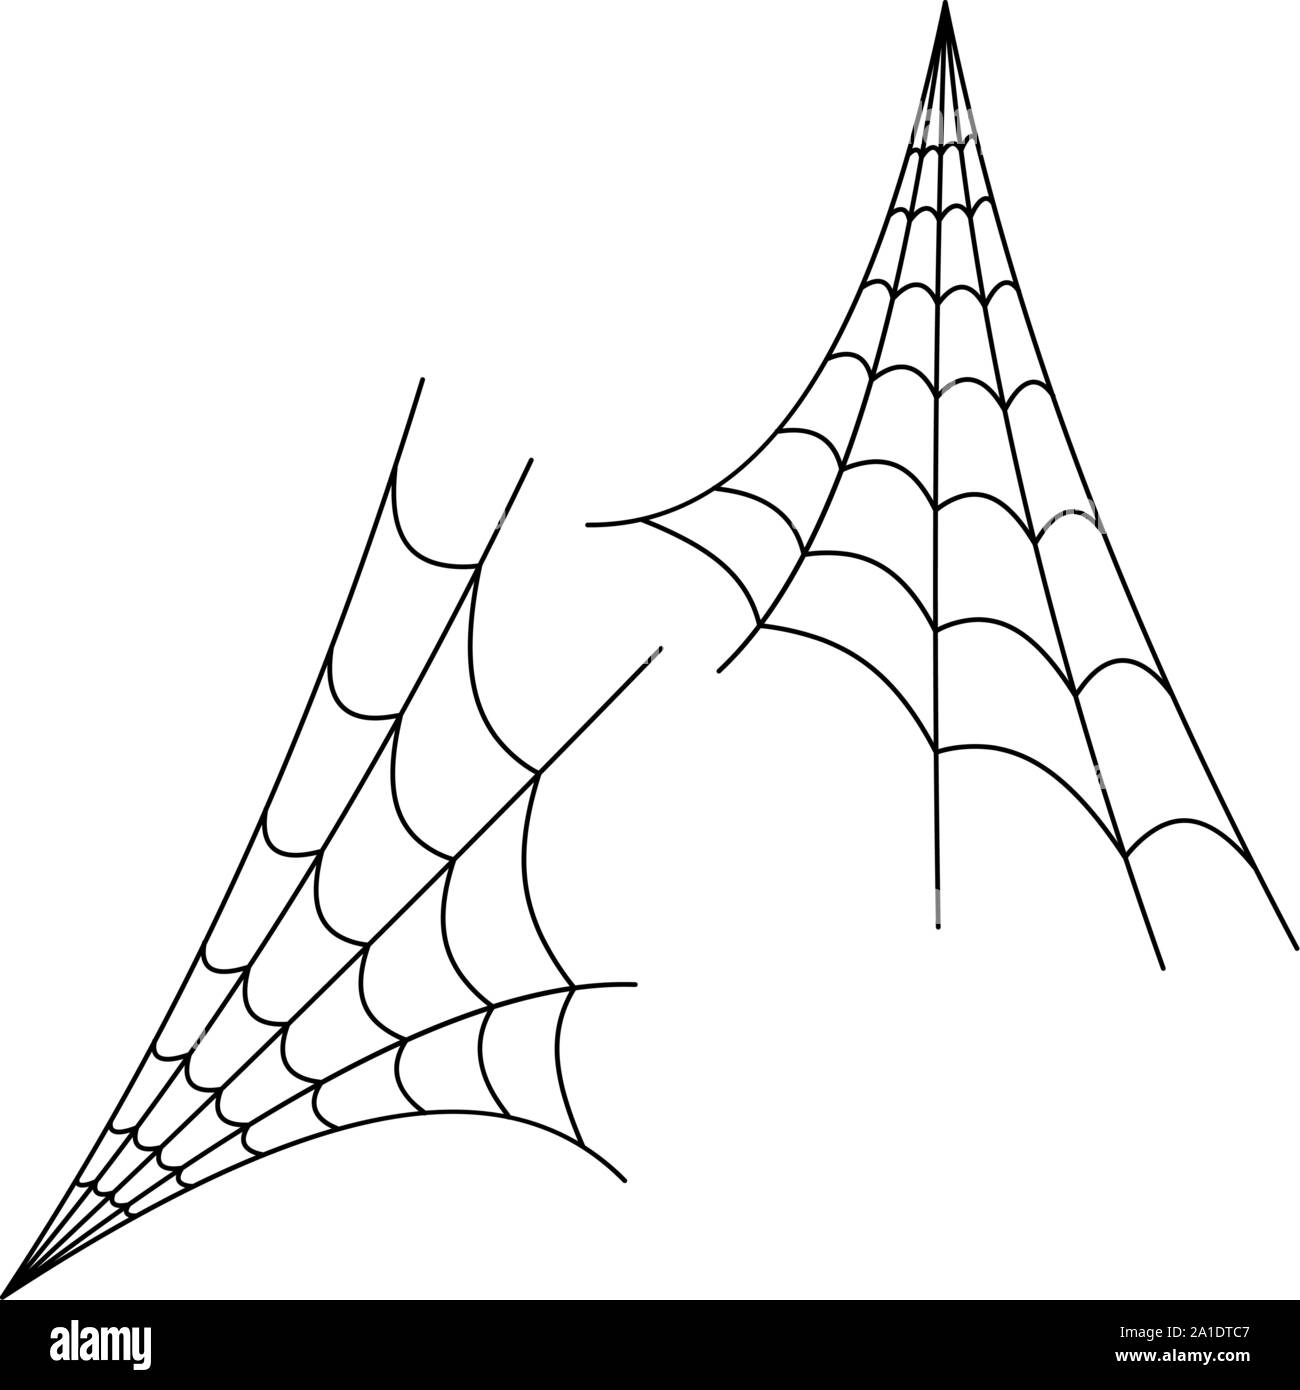 Easy Spider Web Drawing Discount Shopping, Save 44% | jlcatj.gob.mx